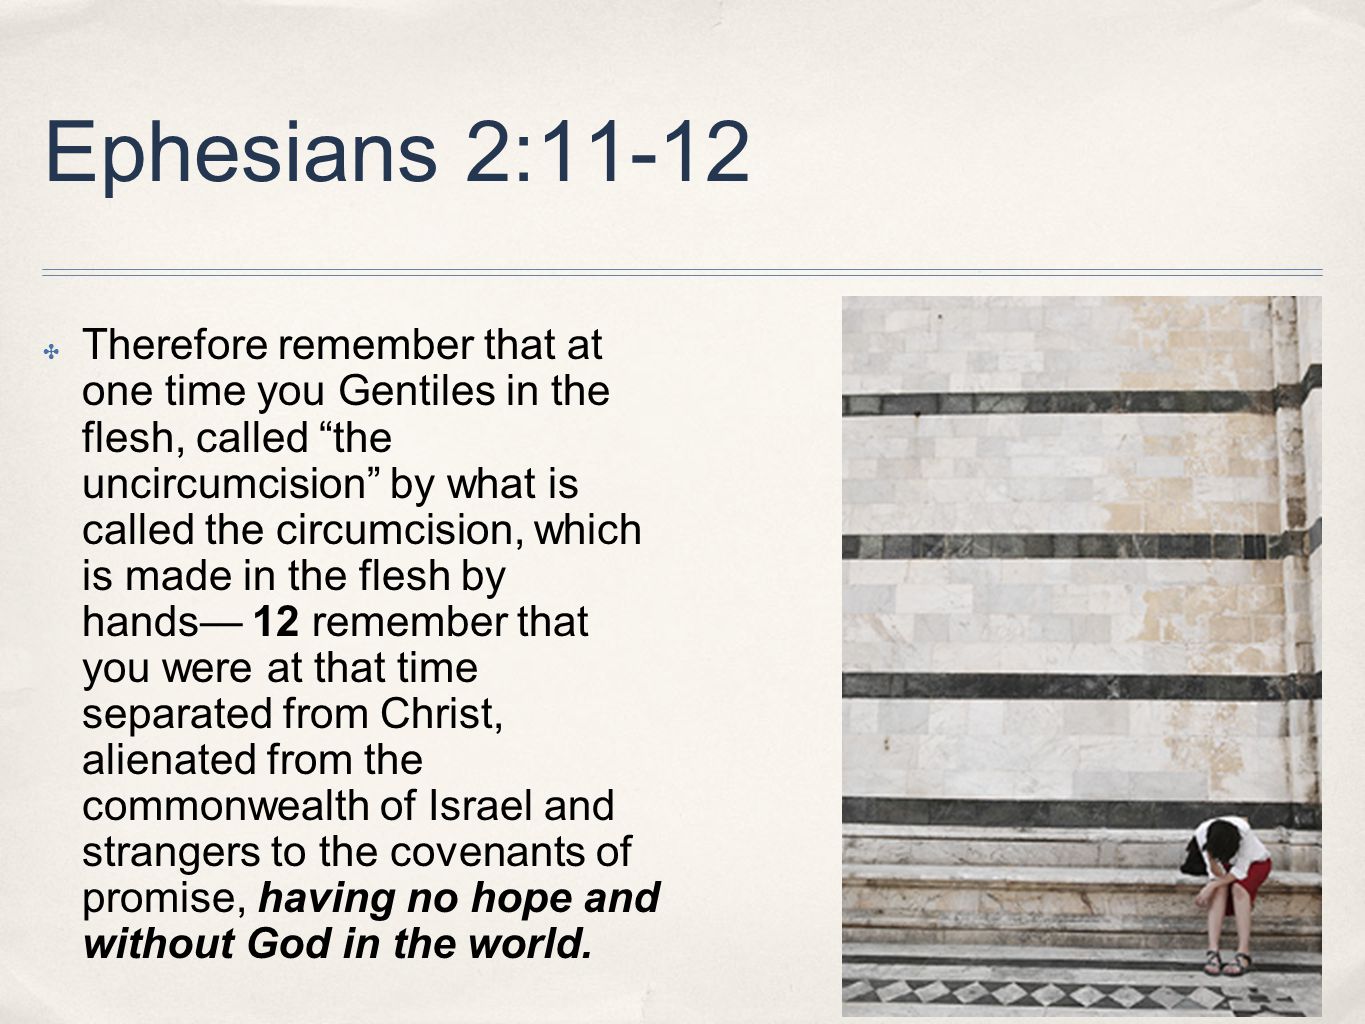 Ephesians 2:11-12 ✤ Therefore remember that at one time you Gentiles in the flesh, called the uncircumcision by what is called the circumcision, which is made in the flesh by hands— 12 remember that you were at that time separated from Christ, alienated from the commonwealth of Israel and strangers to the covenants of promise, having no hope and without God in the world.